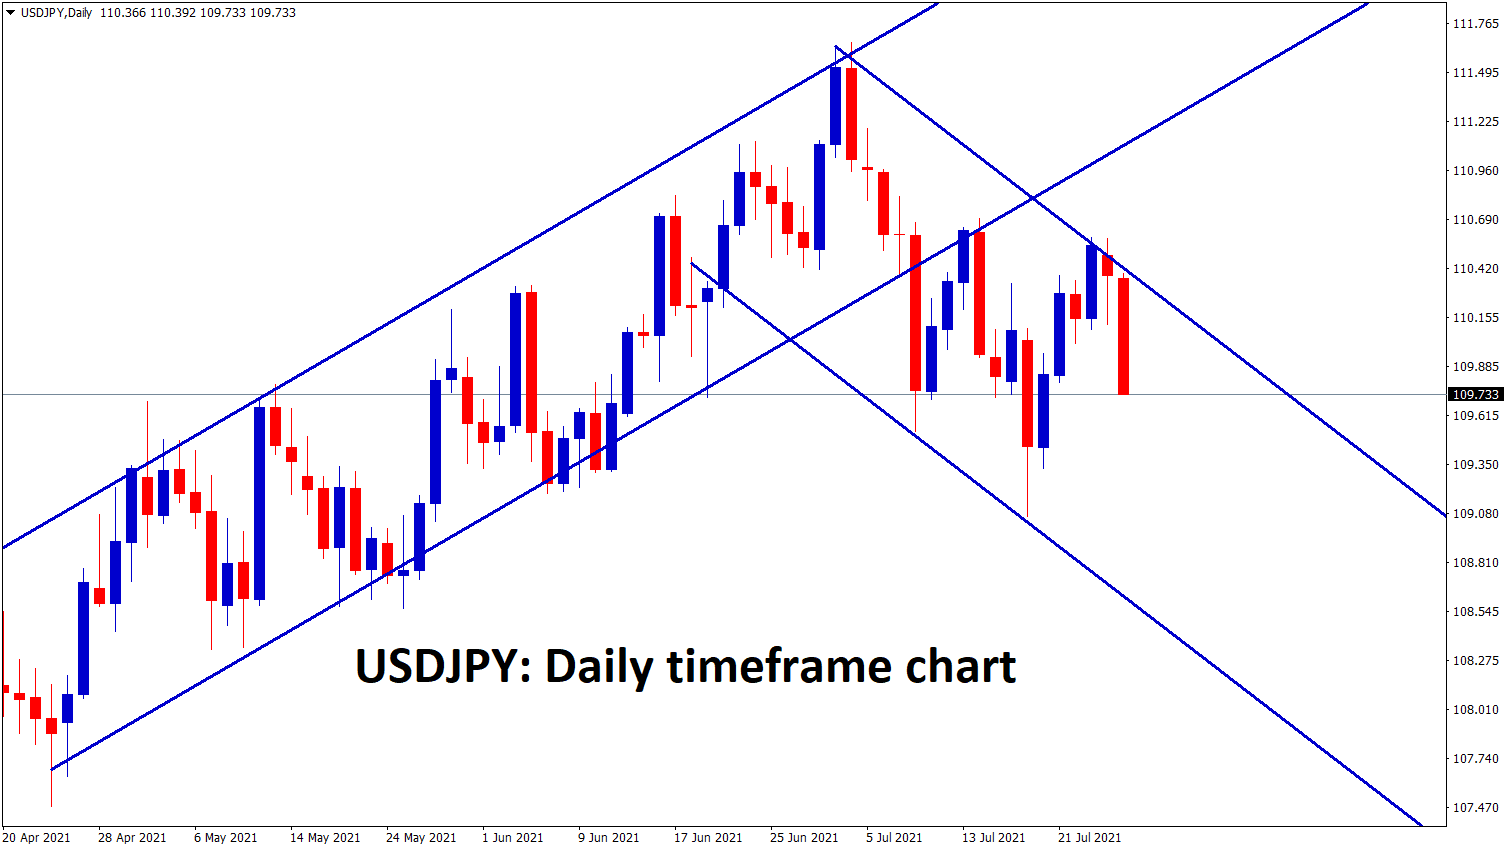 USDJPY is moving between the channel ranges for a long time